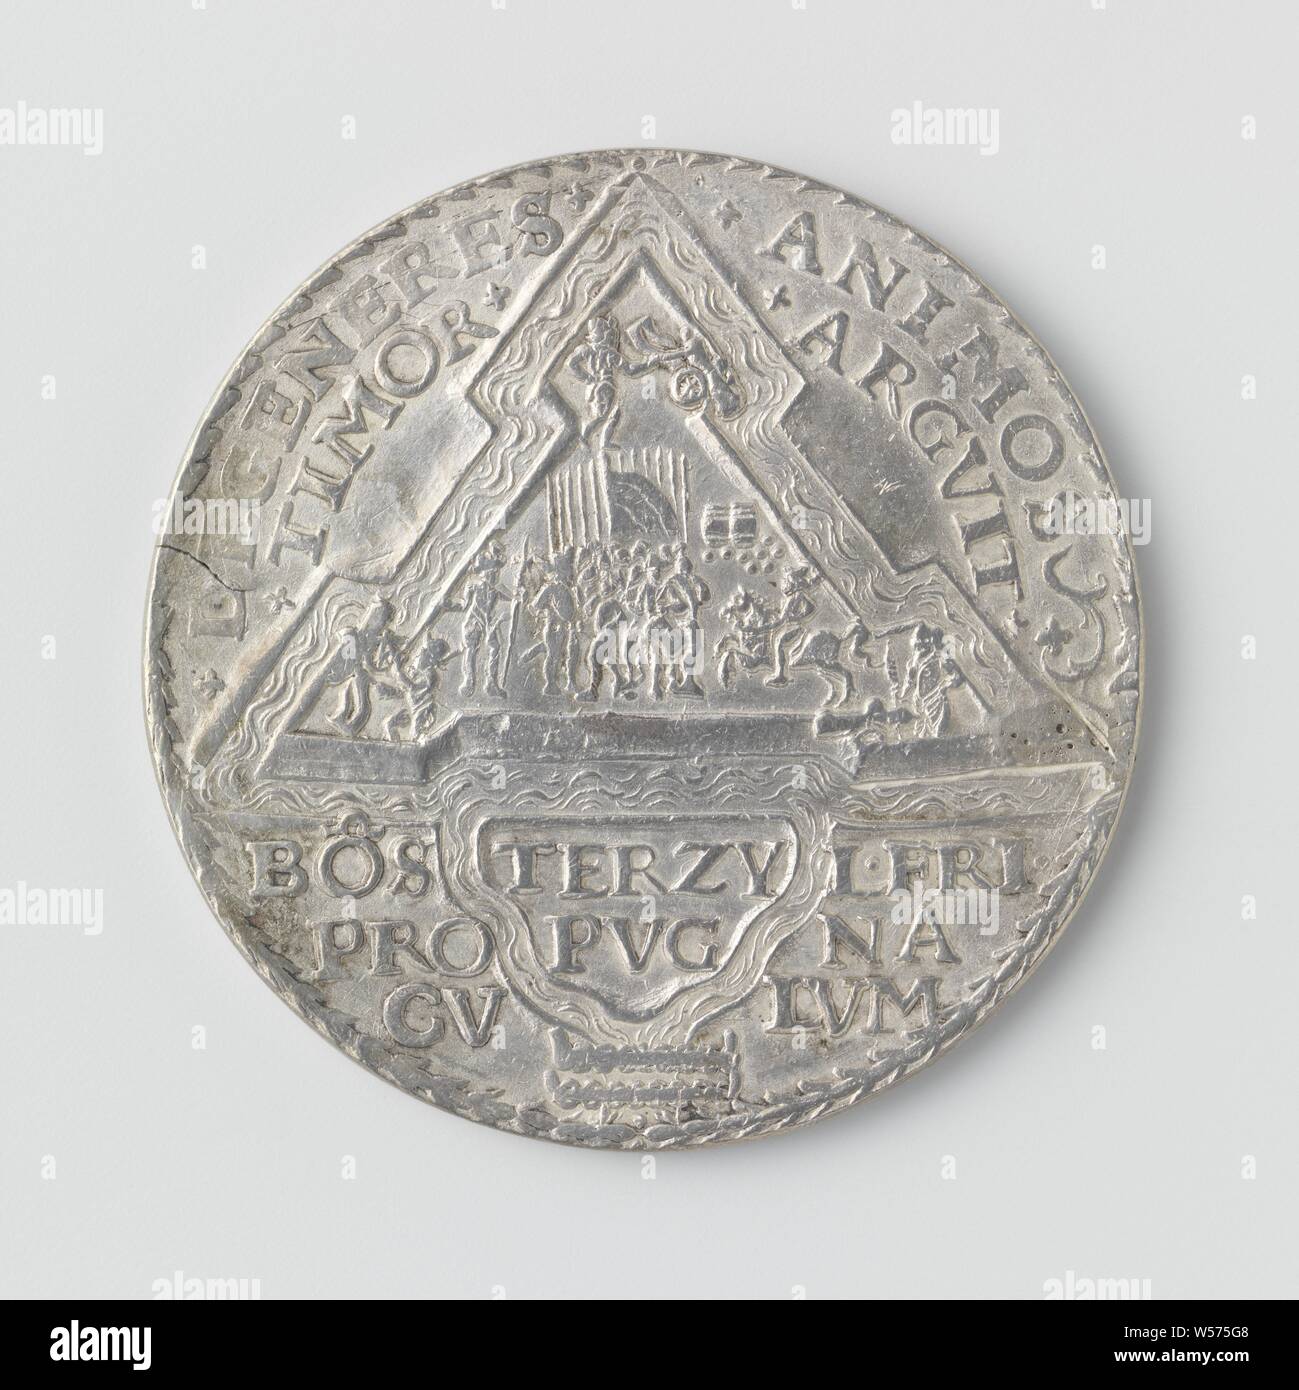 Defense of the Bomsterzijl ramp, medal awarded to the defenders, Silver medal. Front: Bomsterzijl redoubt inside inscription, above inscription. Reverse: inscription between two coats of arms., Bomsterzijl, anonymous, Friesland, 1581, silver (metal), striking (metalworking), d 4.9 cm × w 437 Stock Photo